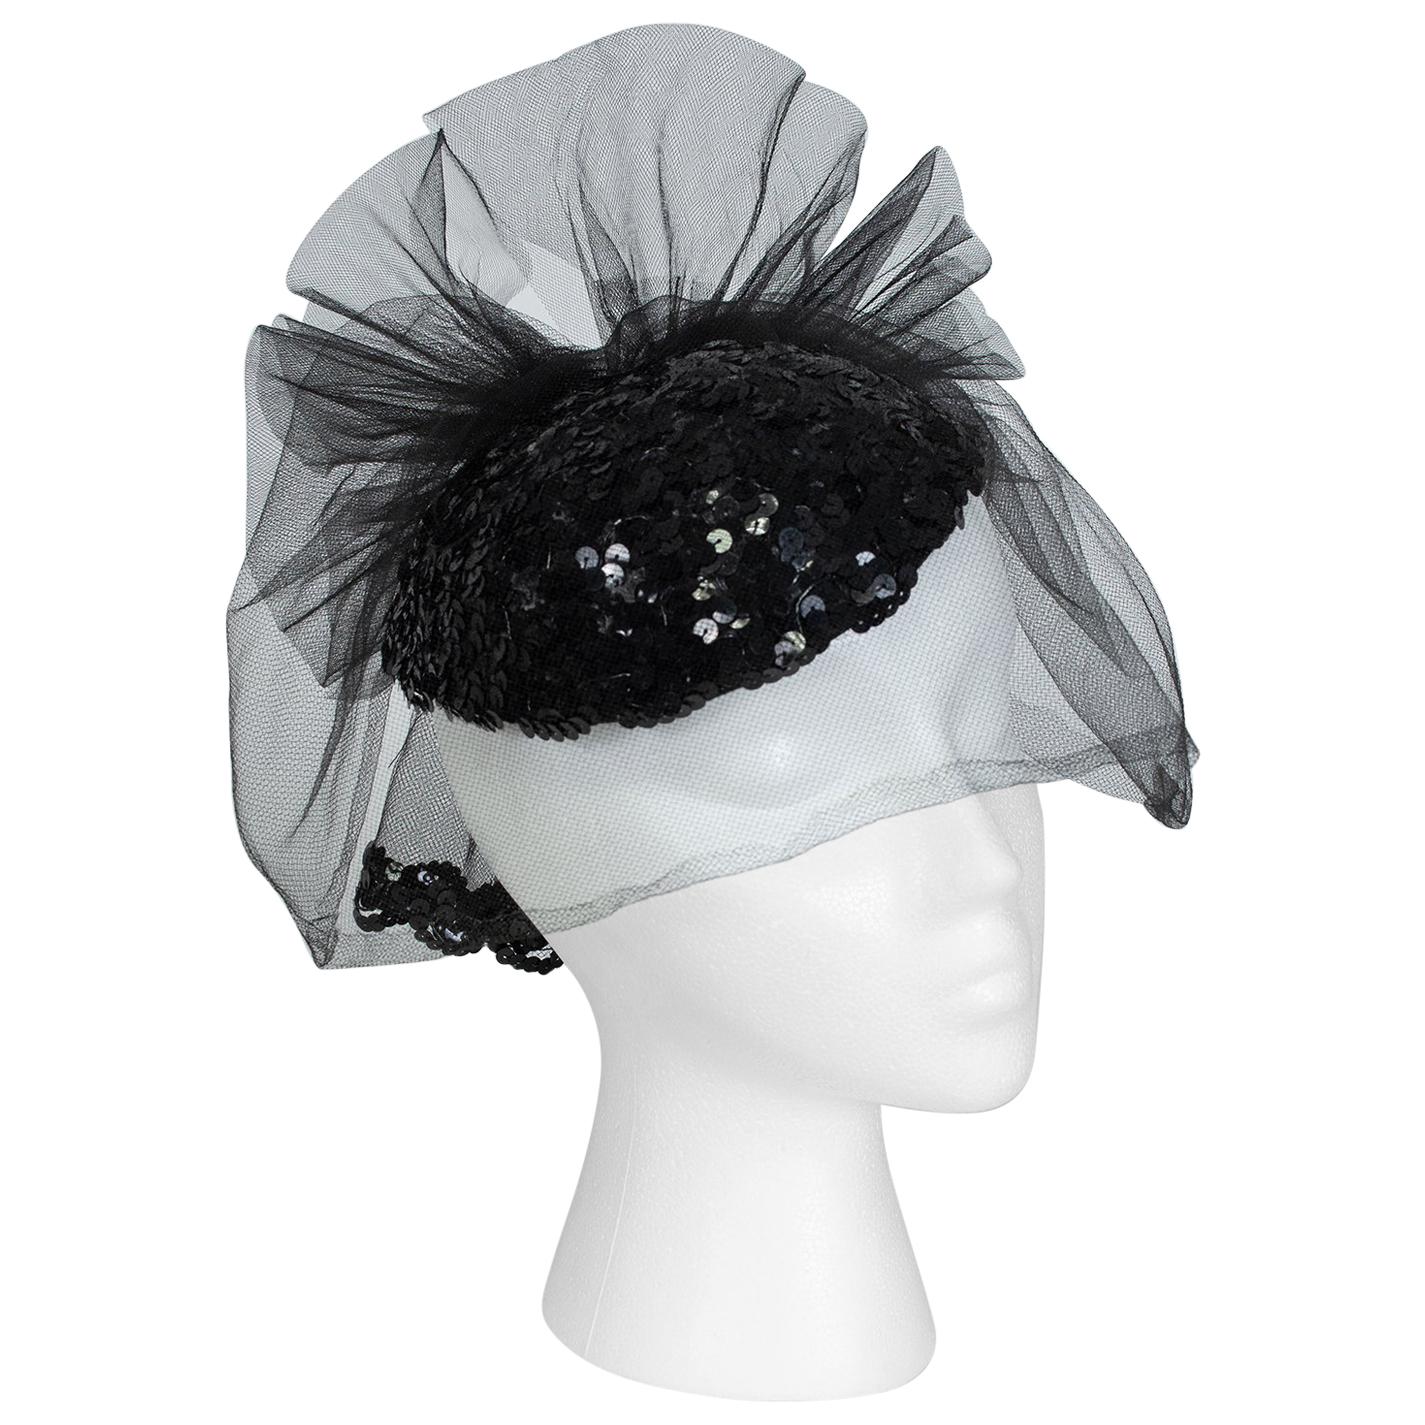 Black Sequin Cocktail Hat with Cage Veil, 1950s